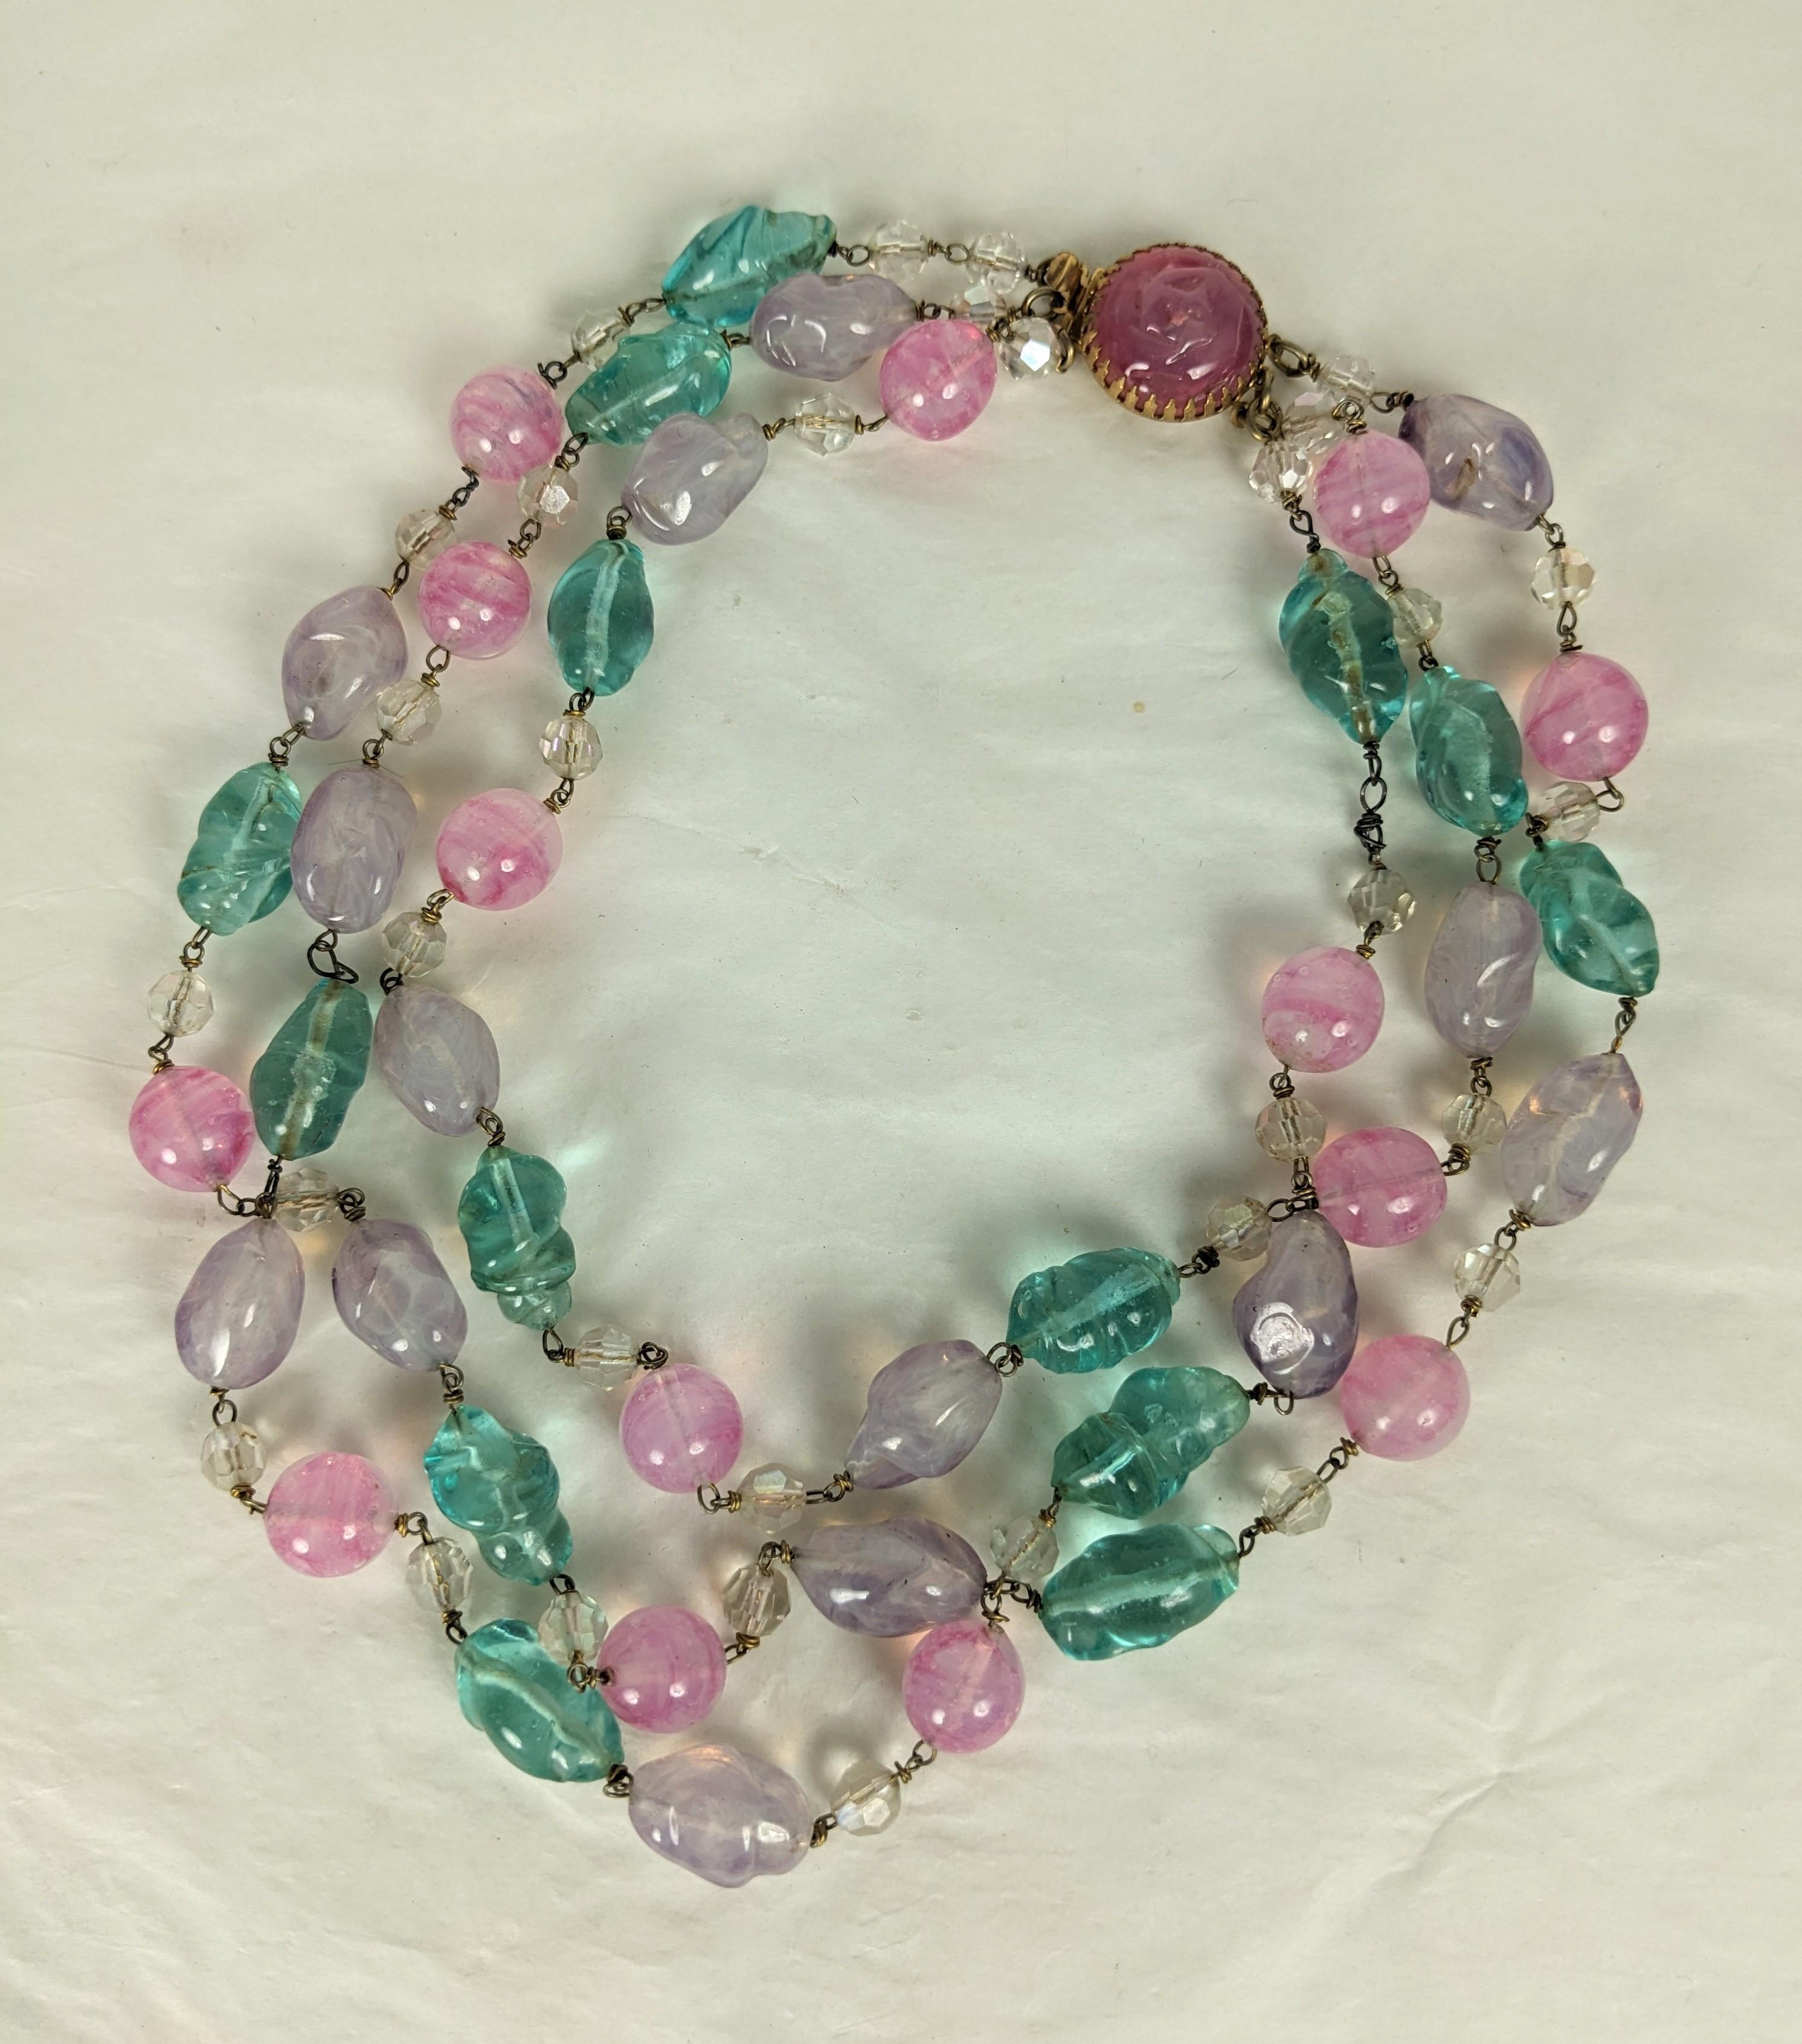 Louis Rousselet pastel 3 strand pate de verre bead necklace. Composed of rose quartz, amythest, and aquamarine pate de verre Gripoix glass handmade  beads. Finely hand wire wrapped and accented with aurora faceted round crystal beads. Round